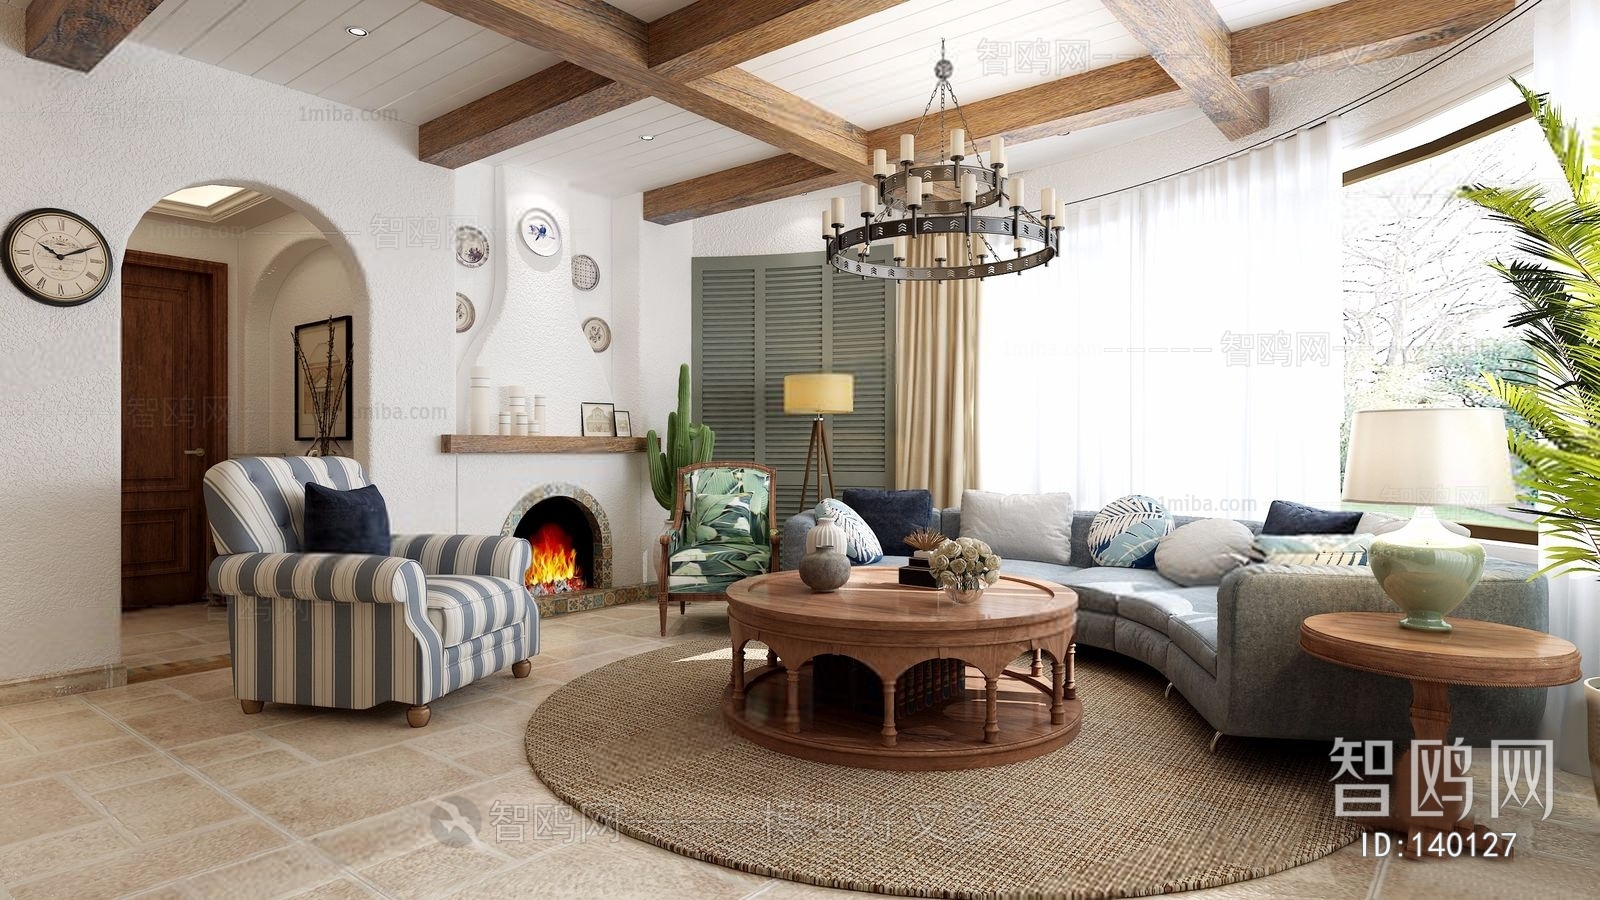 American Style Mediterranean Style A Living Room